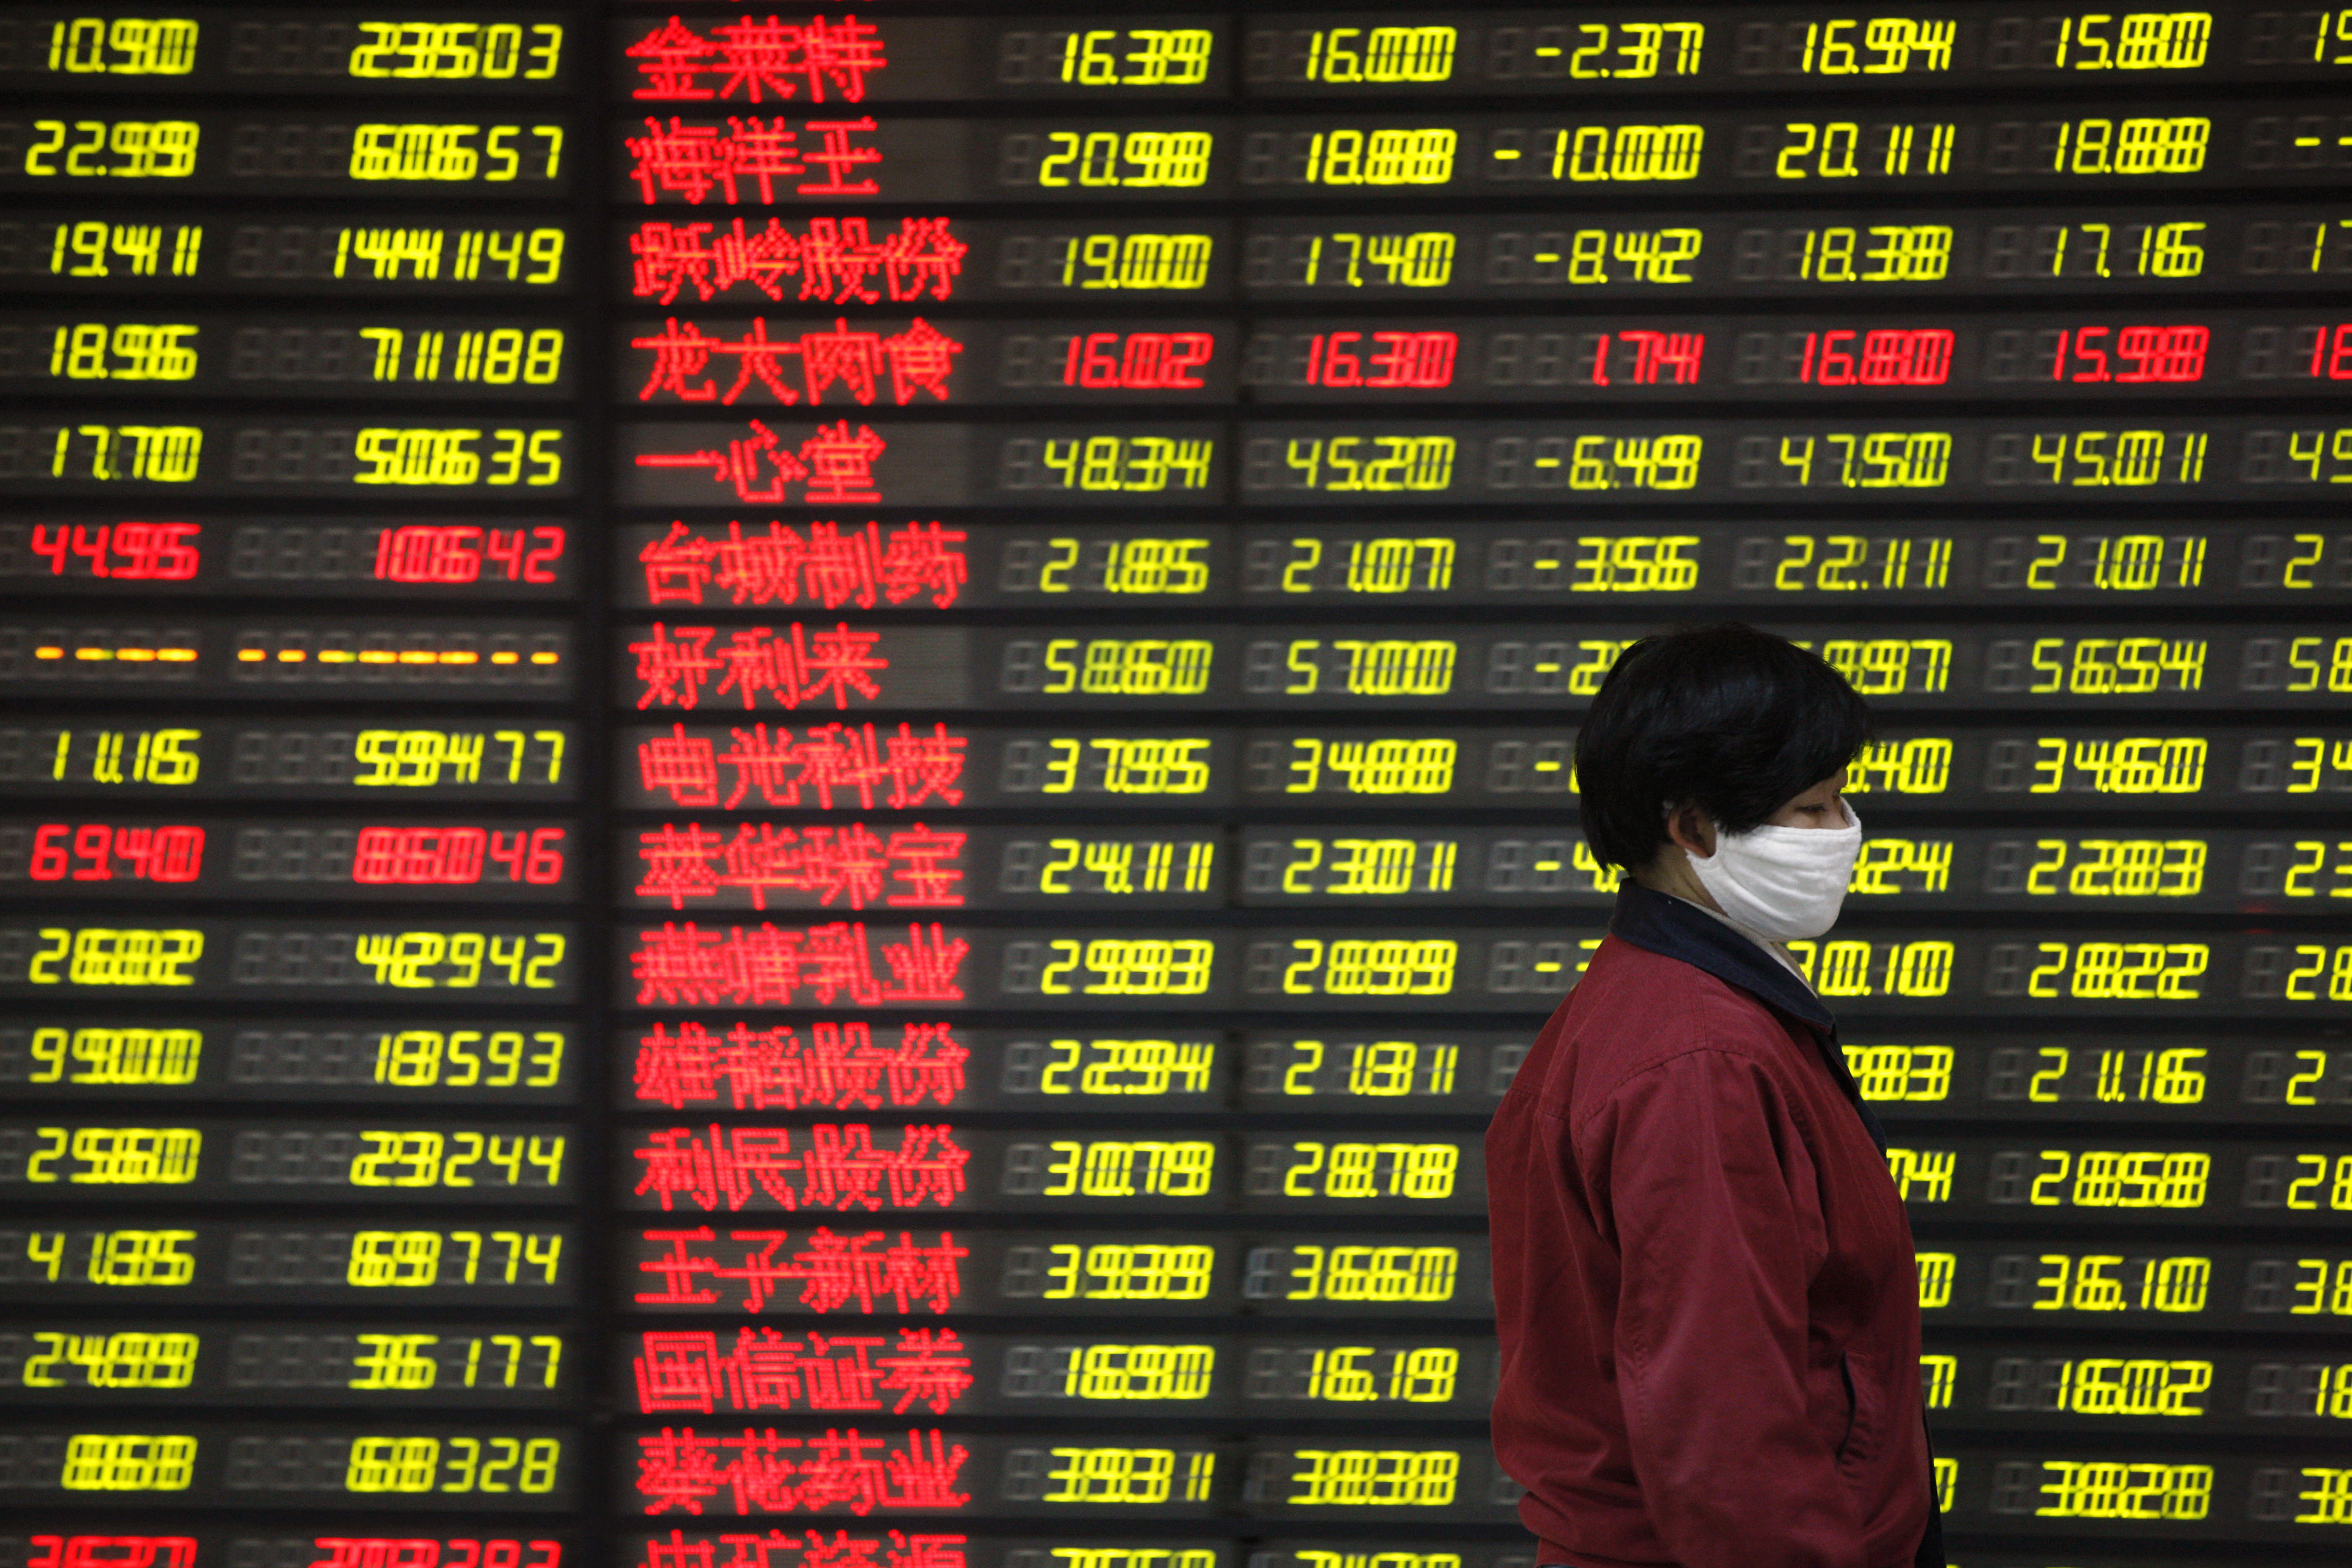 A Chinese investor wearing a face mask walks past electronic displays showing stock prices at a brokerage house in Huaibei in central China's Anhui province Friday, Jan. 15, 2016. China's Shanghai stock index sank to its lowest level in more than one year on Friday, as renewed concerns about the world's second-largest economy led global benchmarks lower. (Chinatopix via AP) CHINA OUT